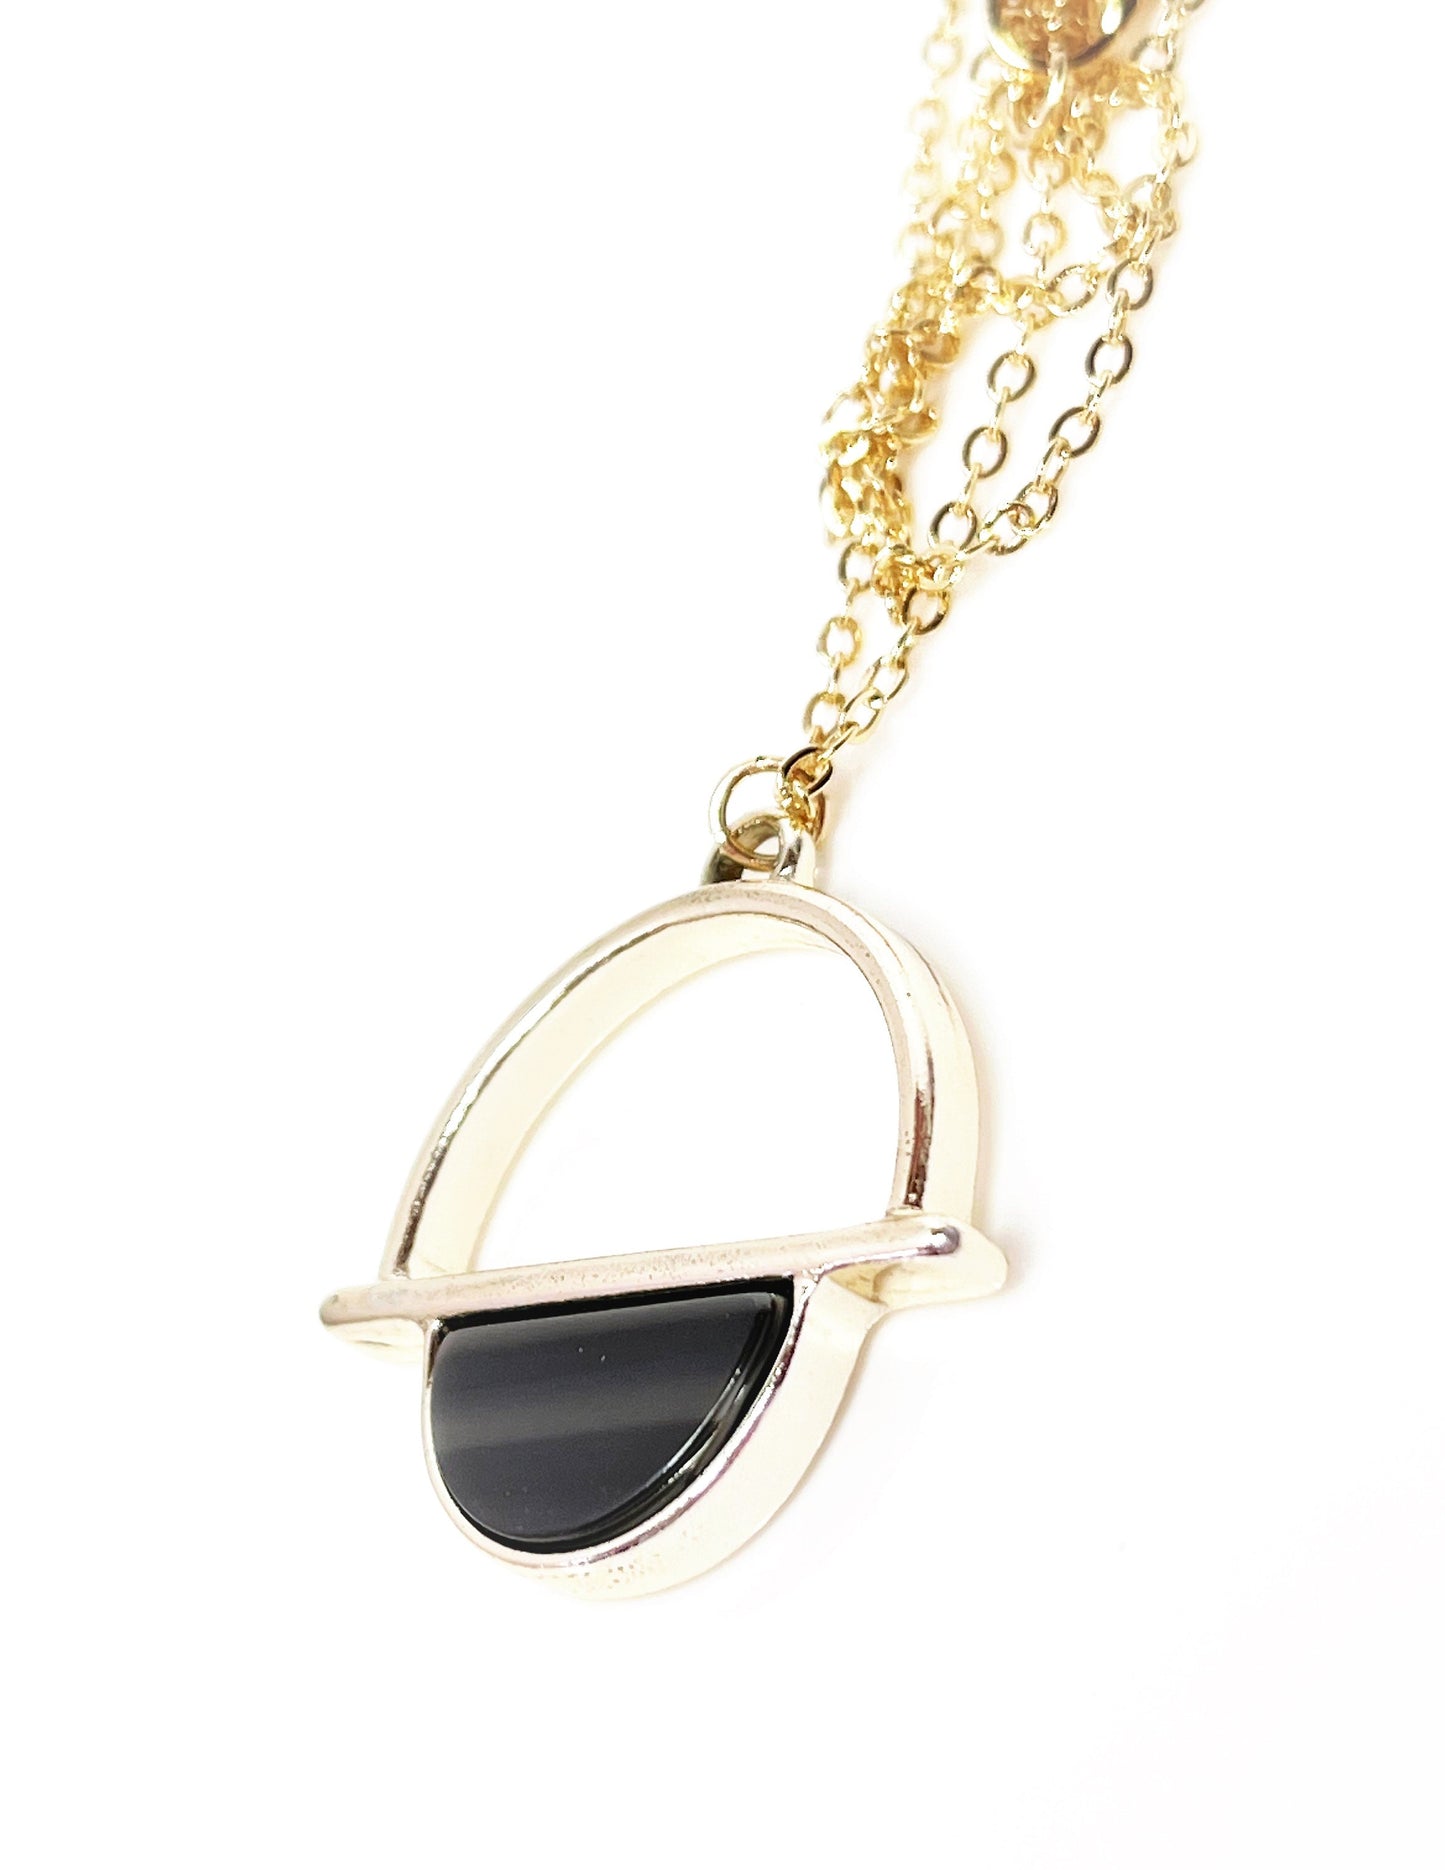 Black Semi-circle Gold Acrylic Pendant, 14kt Gold Filled, Tortoise Shell Round Pendant, Women Gift, Necklaces for Women, Acetate Necklace